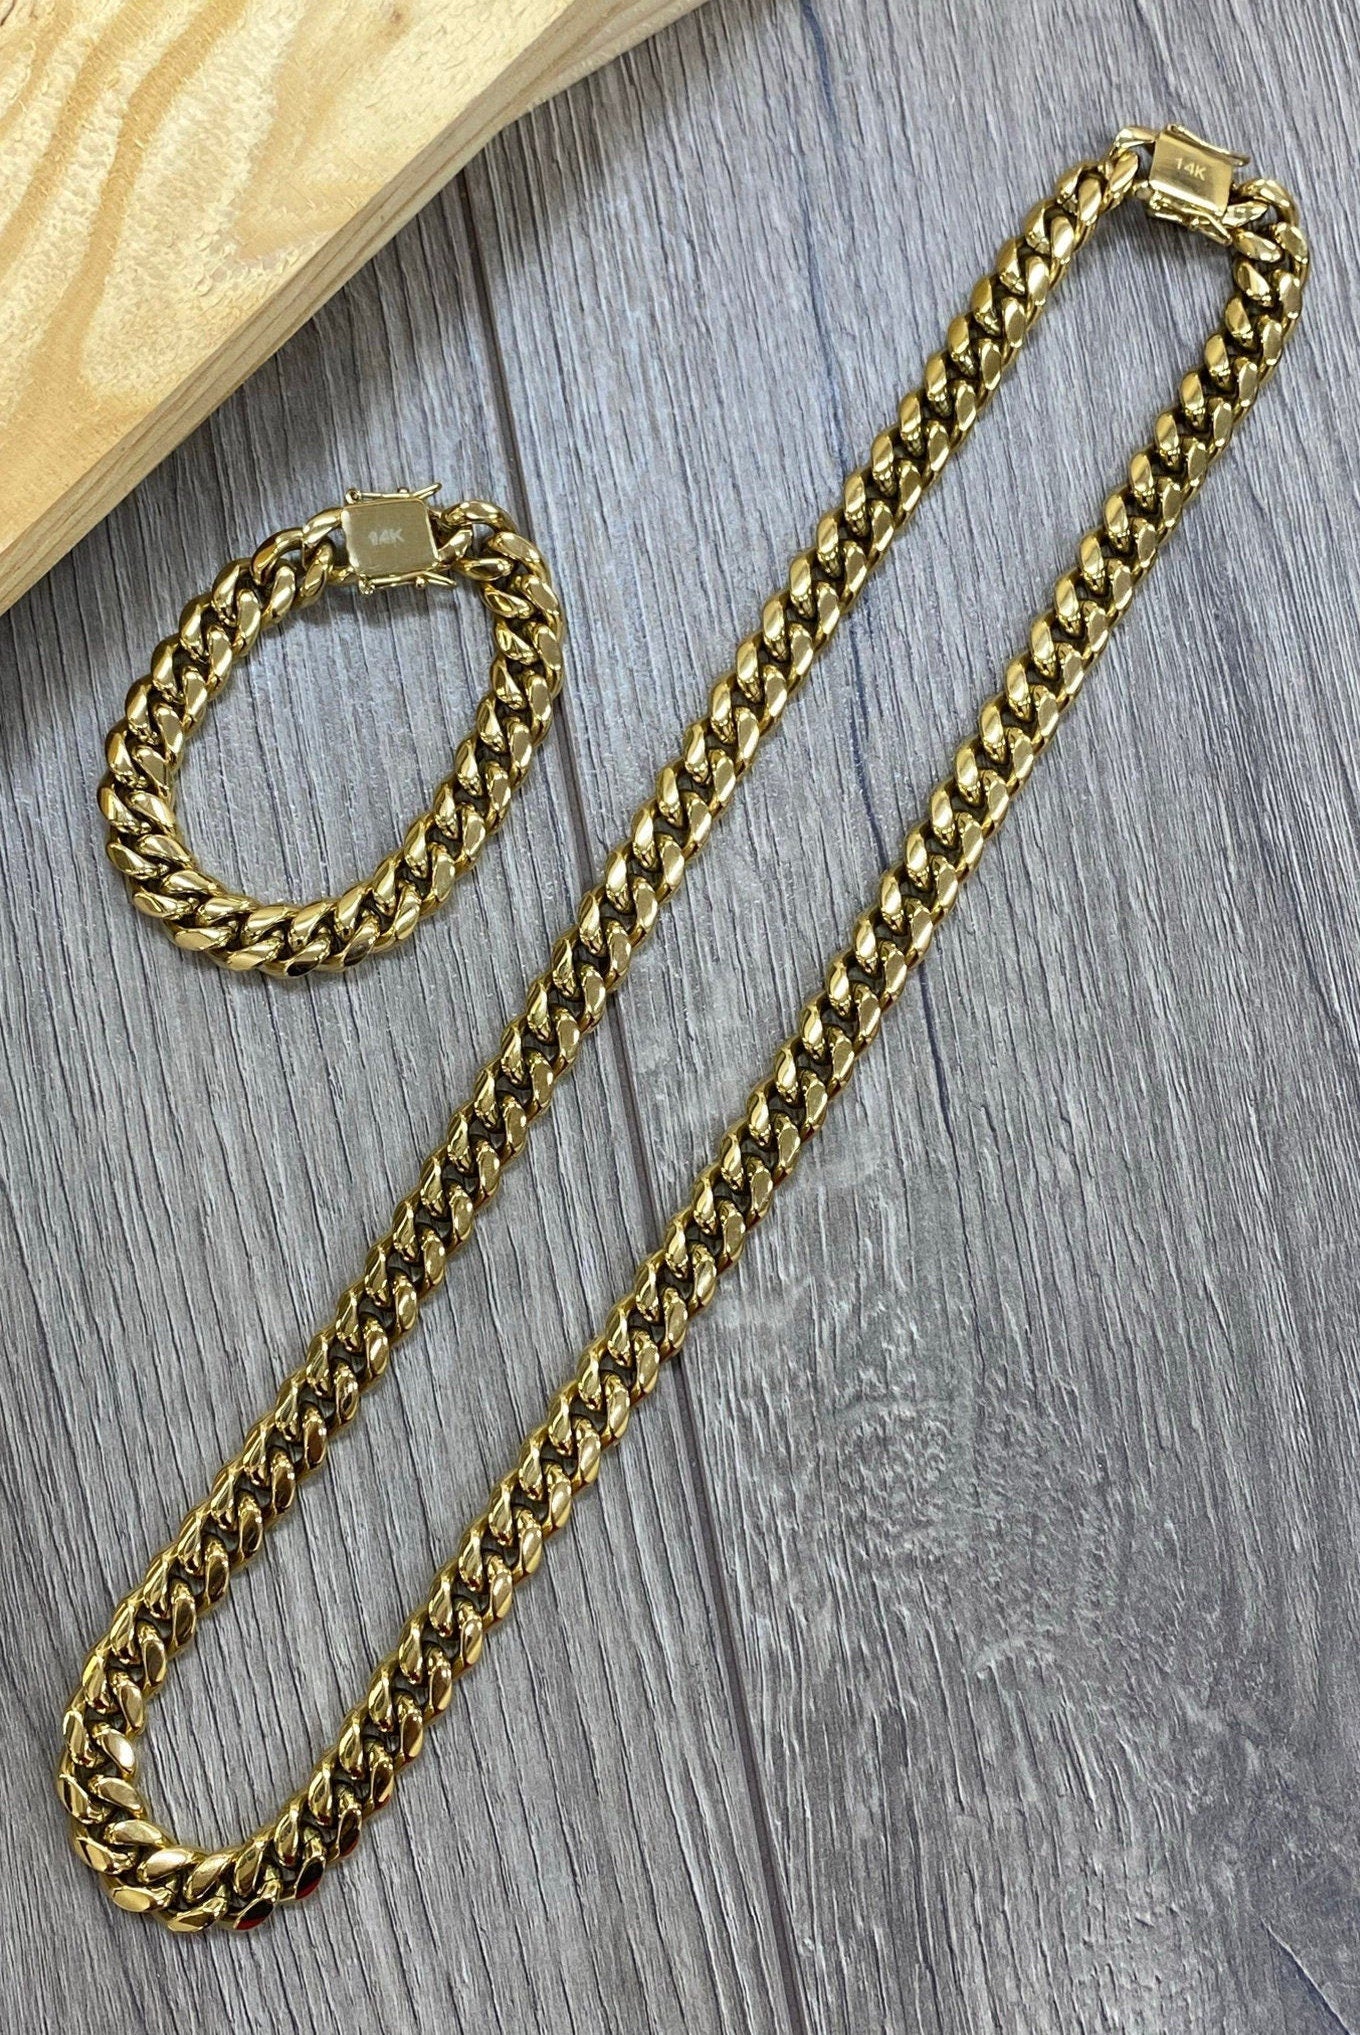 14k Gold Filled 12mm Miami Cuban Link Chain or Bracelet Featuring Box Clasp With Double Safety Lock, Unisex Curb Link, Wholesale Jewelry